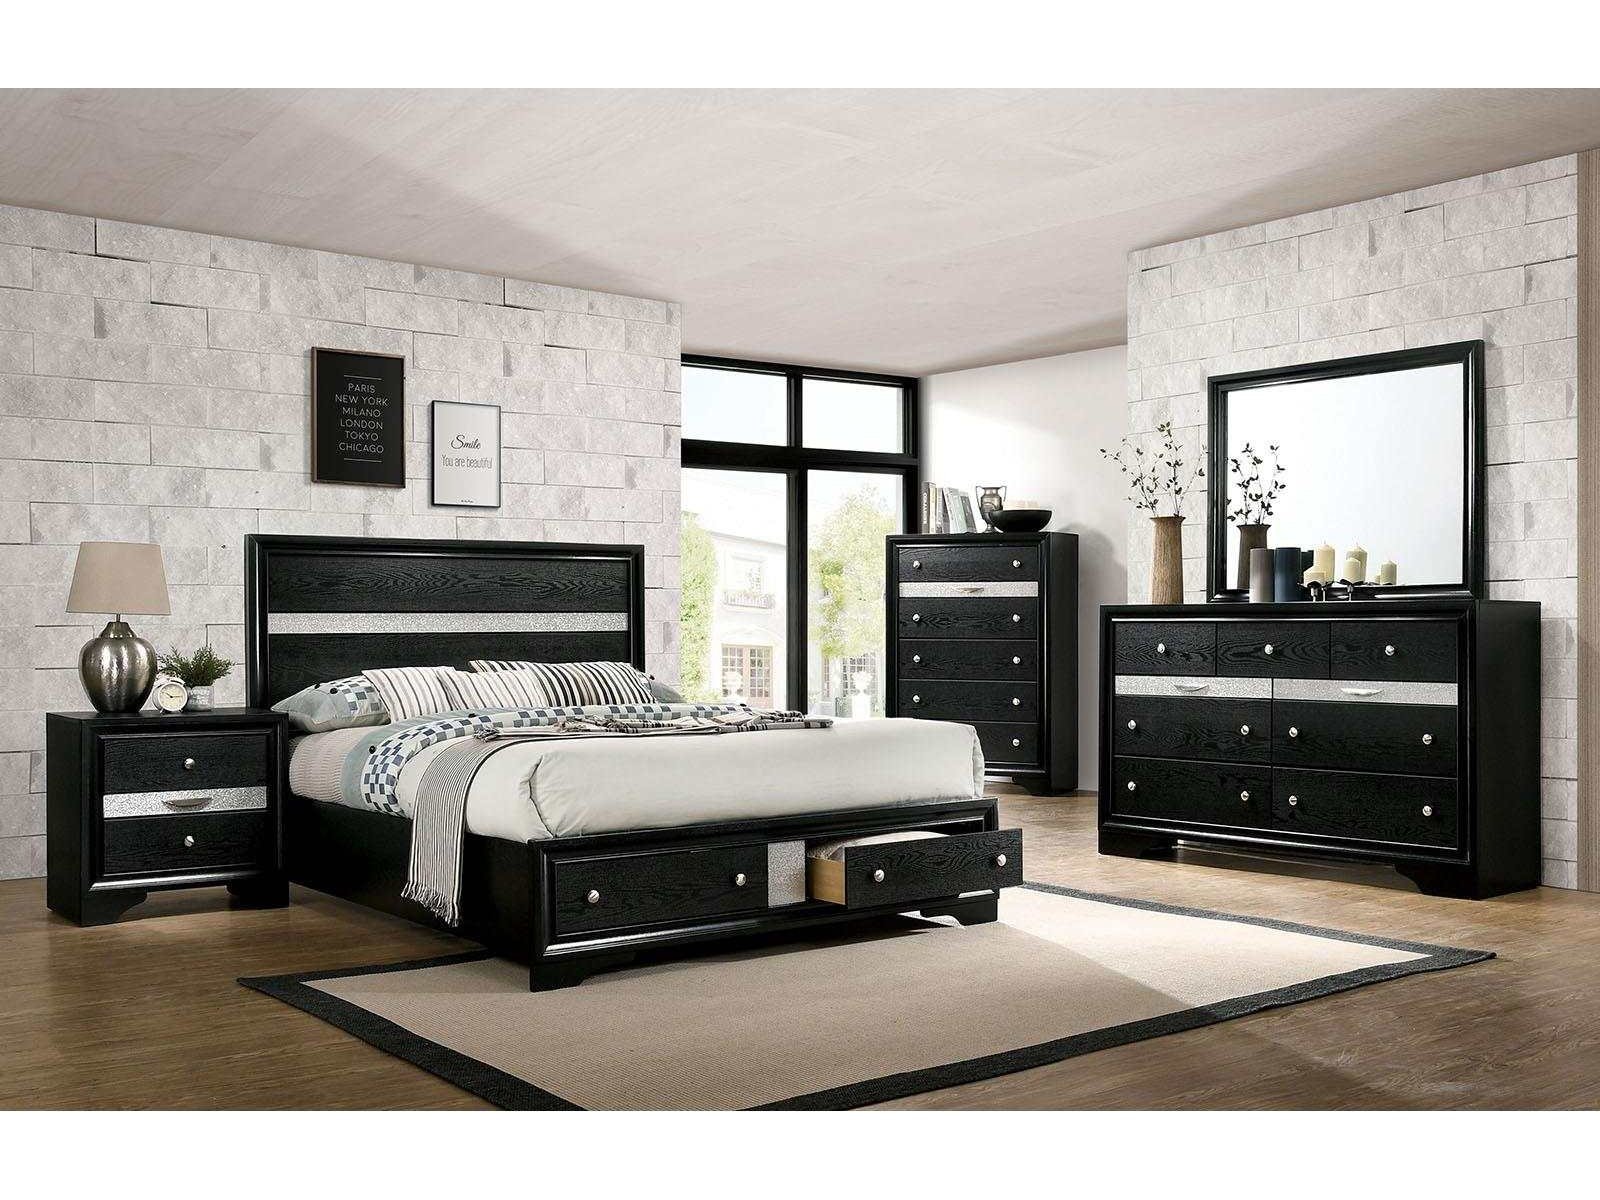 Chrissy Black 5 Pc. Queen Bedroom Set w/ Night Stand